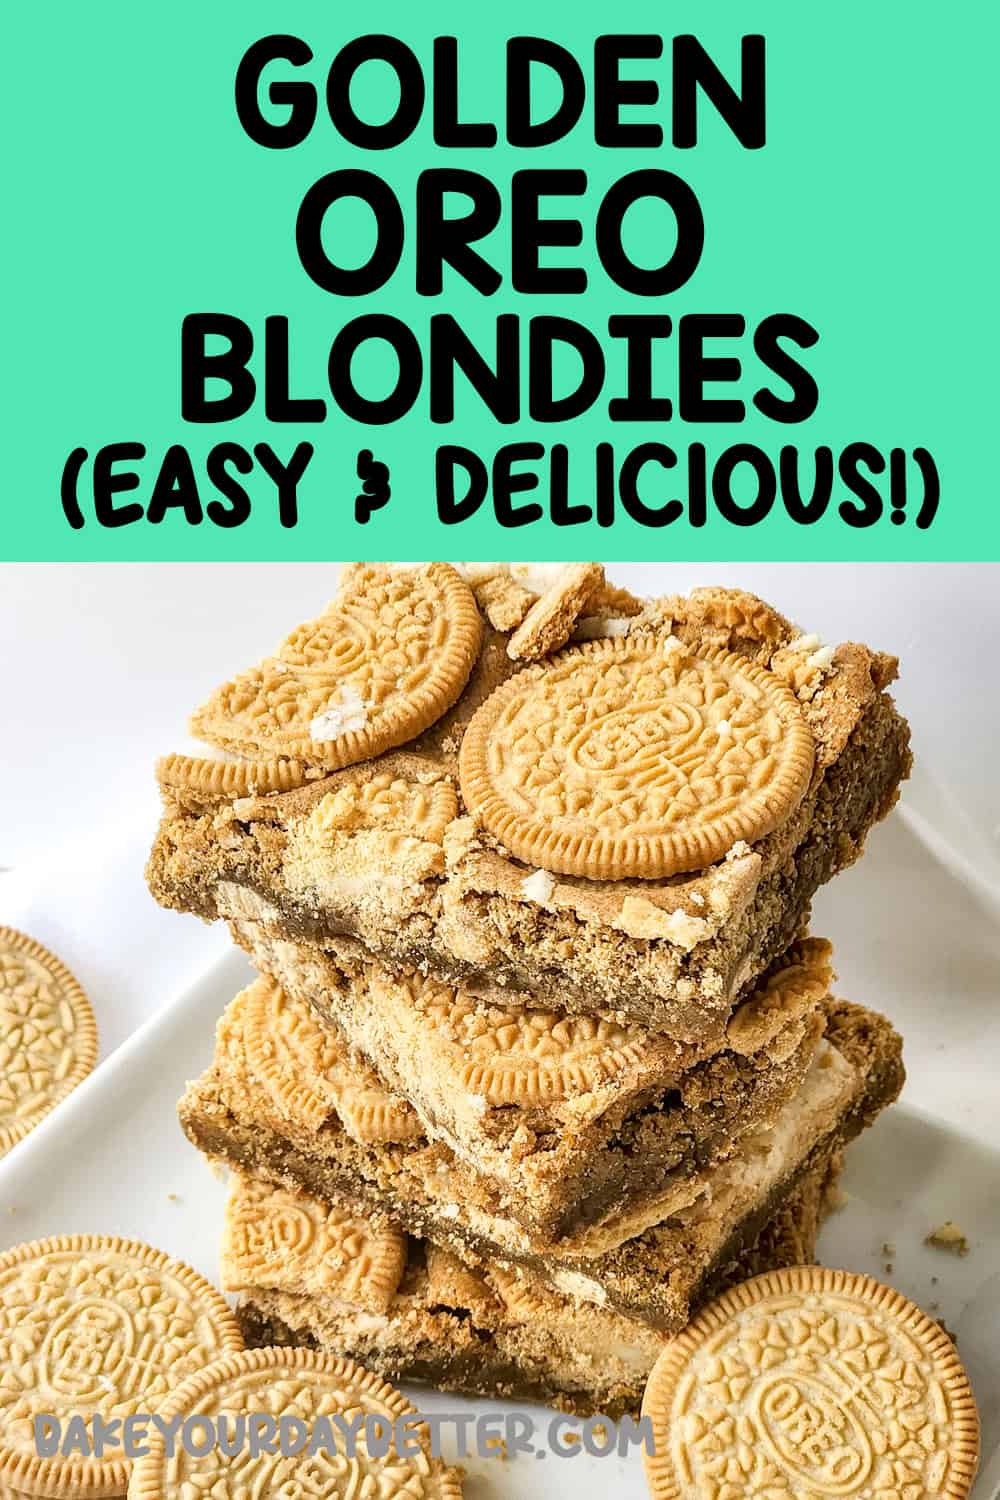 golden oreo blondies with text overlay that says: golden oreo blondies easy and delicious